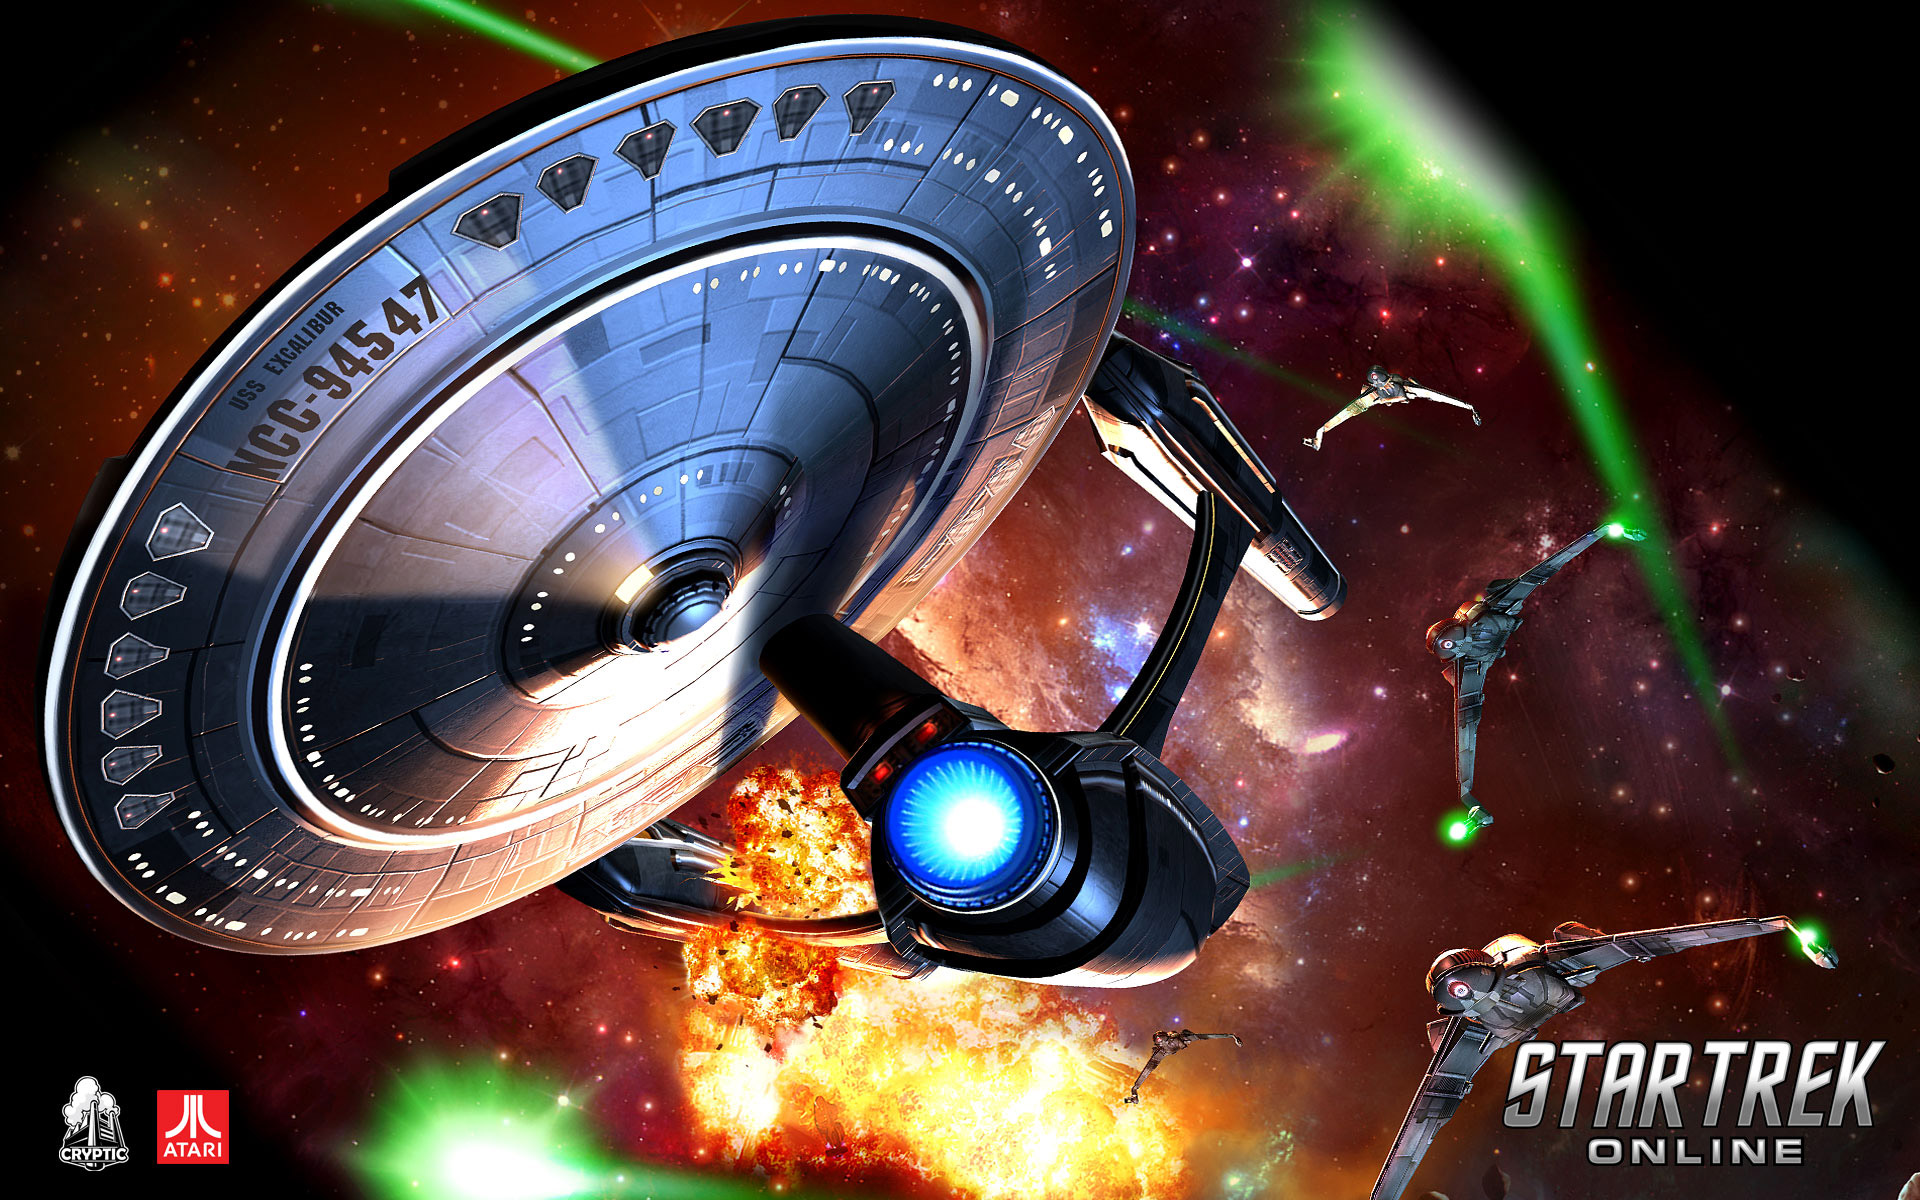 Free Download Hd Star Trek Online Wallpaper For Iphone Android Mobile 19x10 For Your Desktop Mobile Tablet Explore 50 Star Trek Wallpaper For Android Star Trek Wallpaper Star